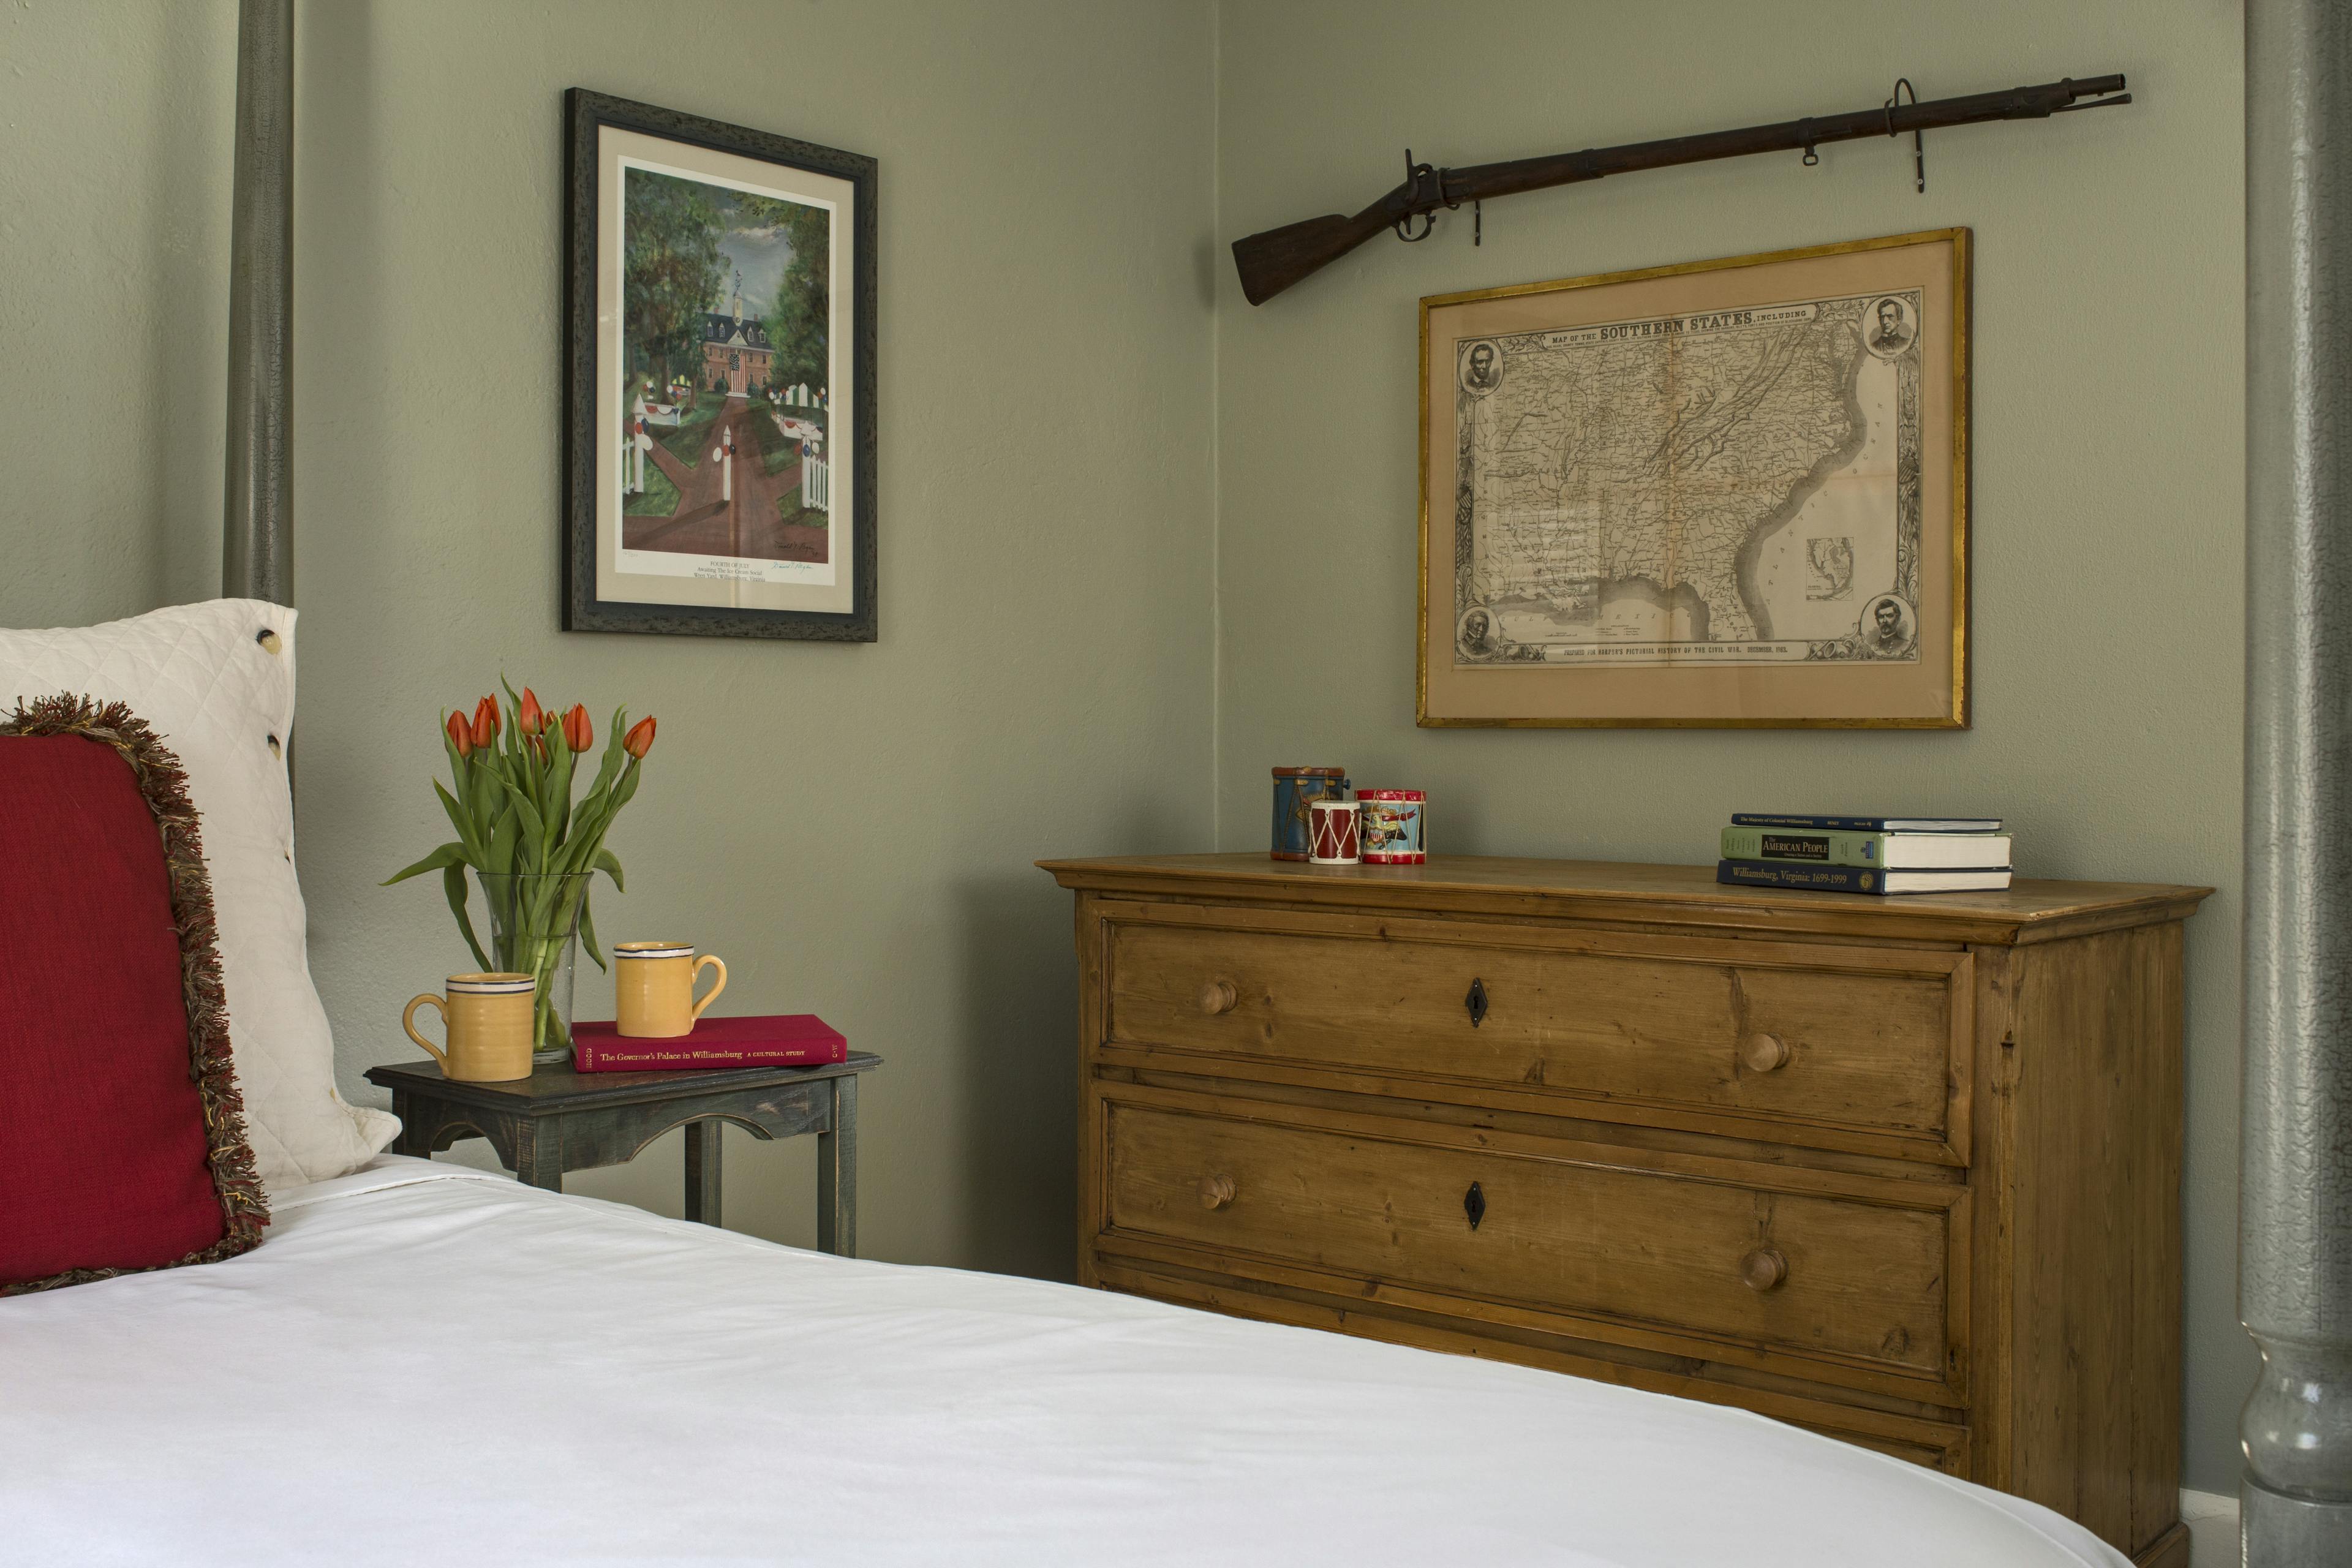 Partial view of four-poster bed, bedside table, large bureau with map and long rifle hanging on wall above